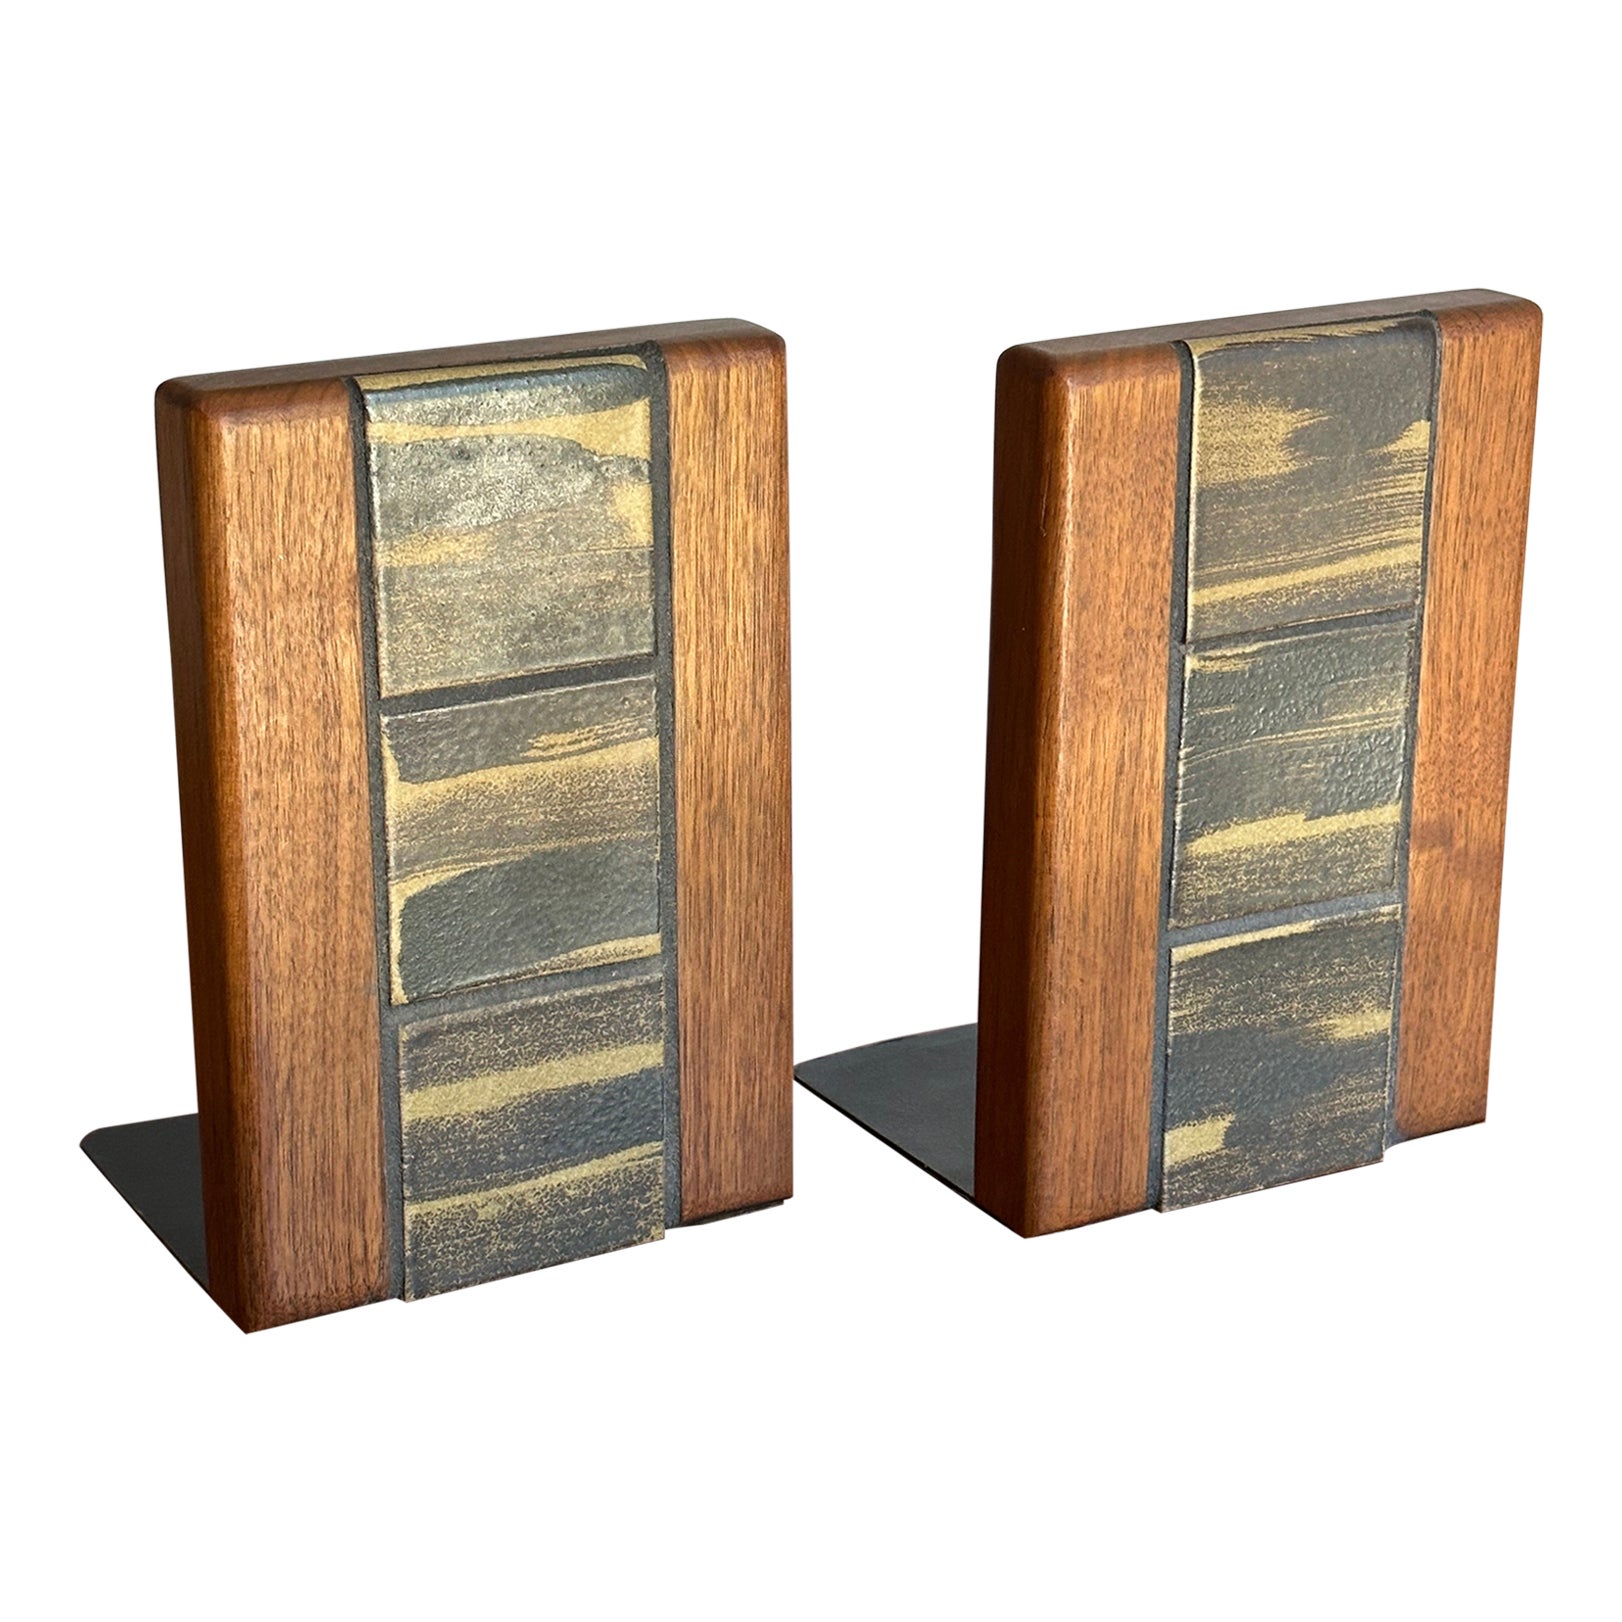 Jane and Gordon Martz Bookends for Marshall Studios